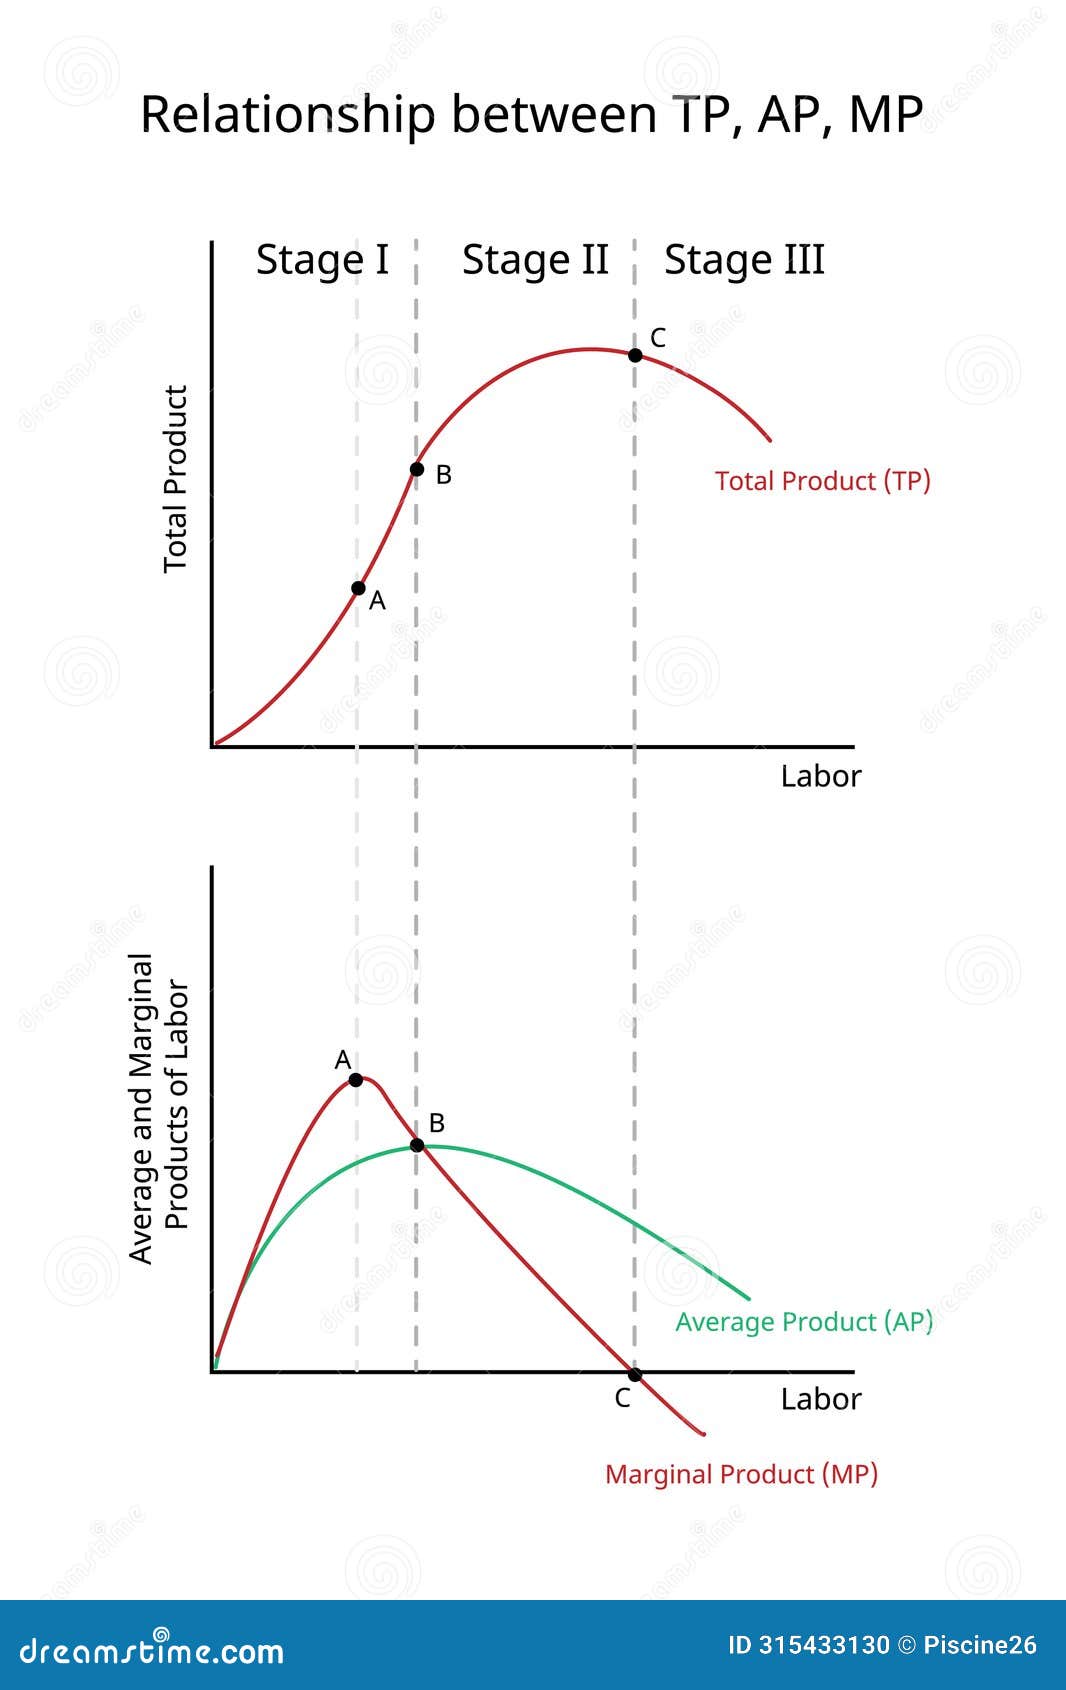 theory of production for total product, average product, marginal product